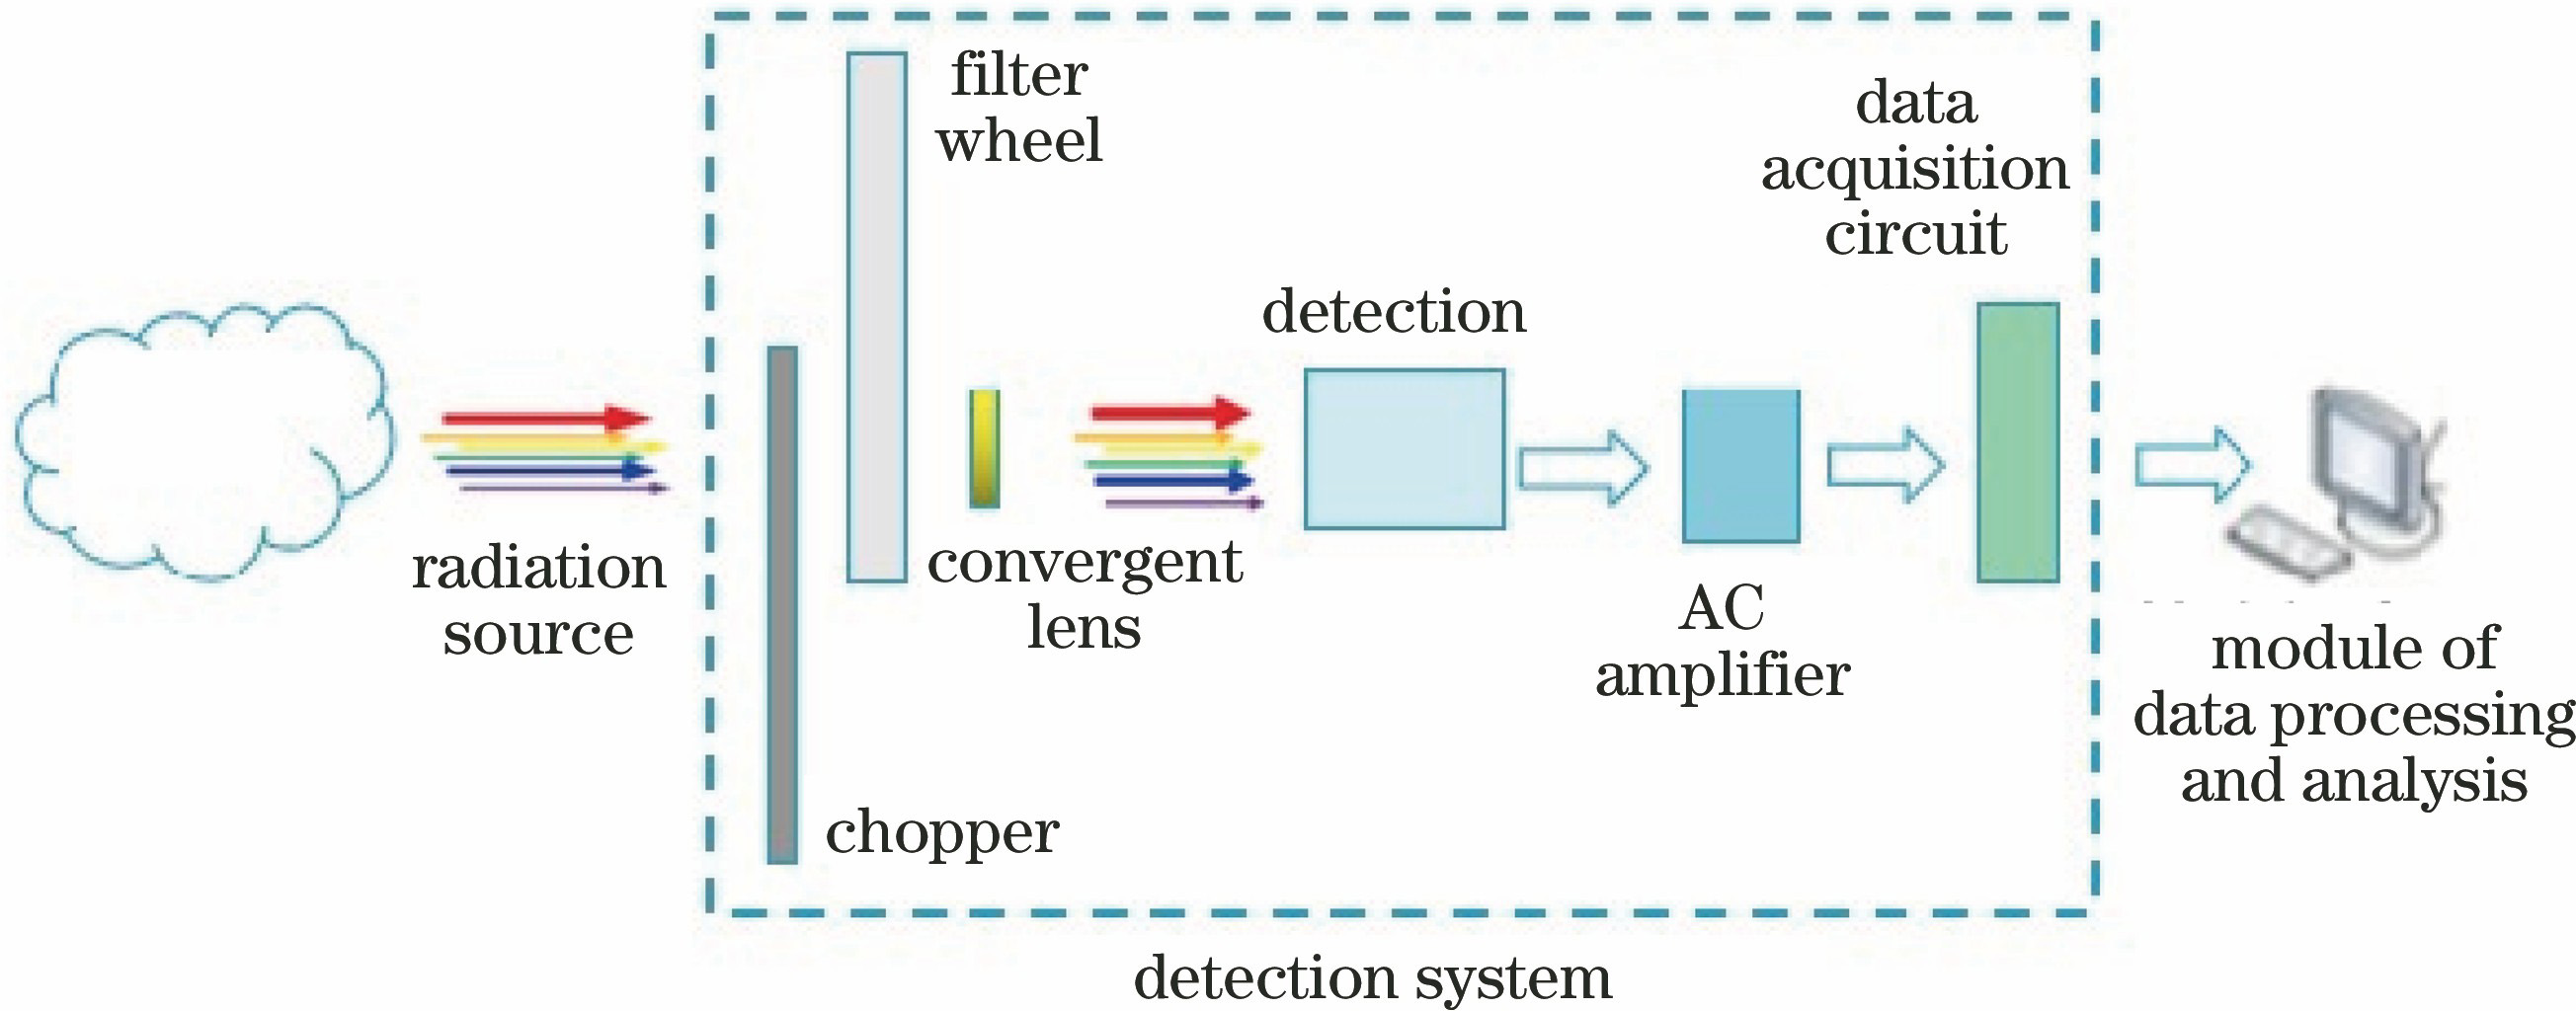 Structure of detection system